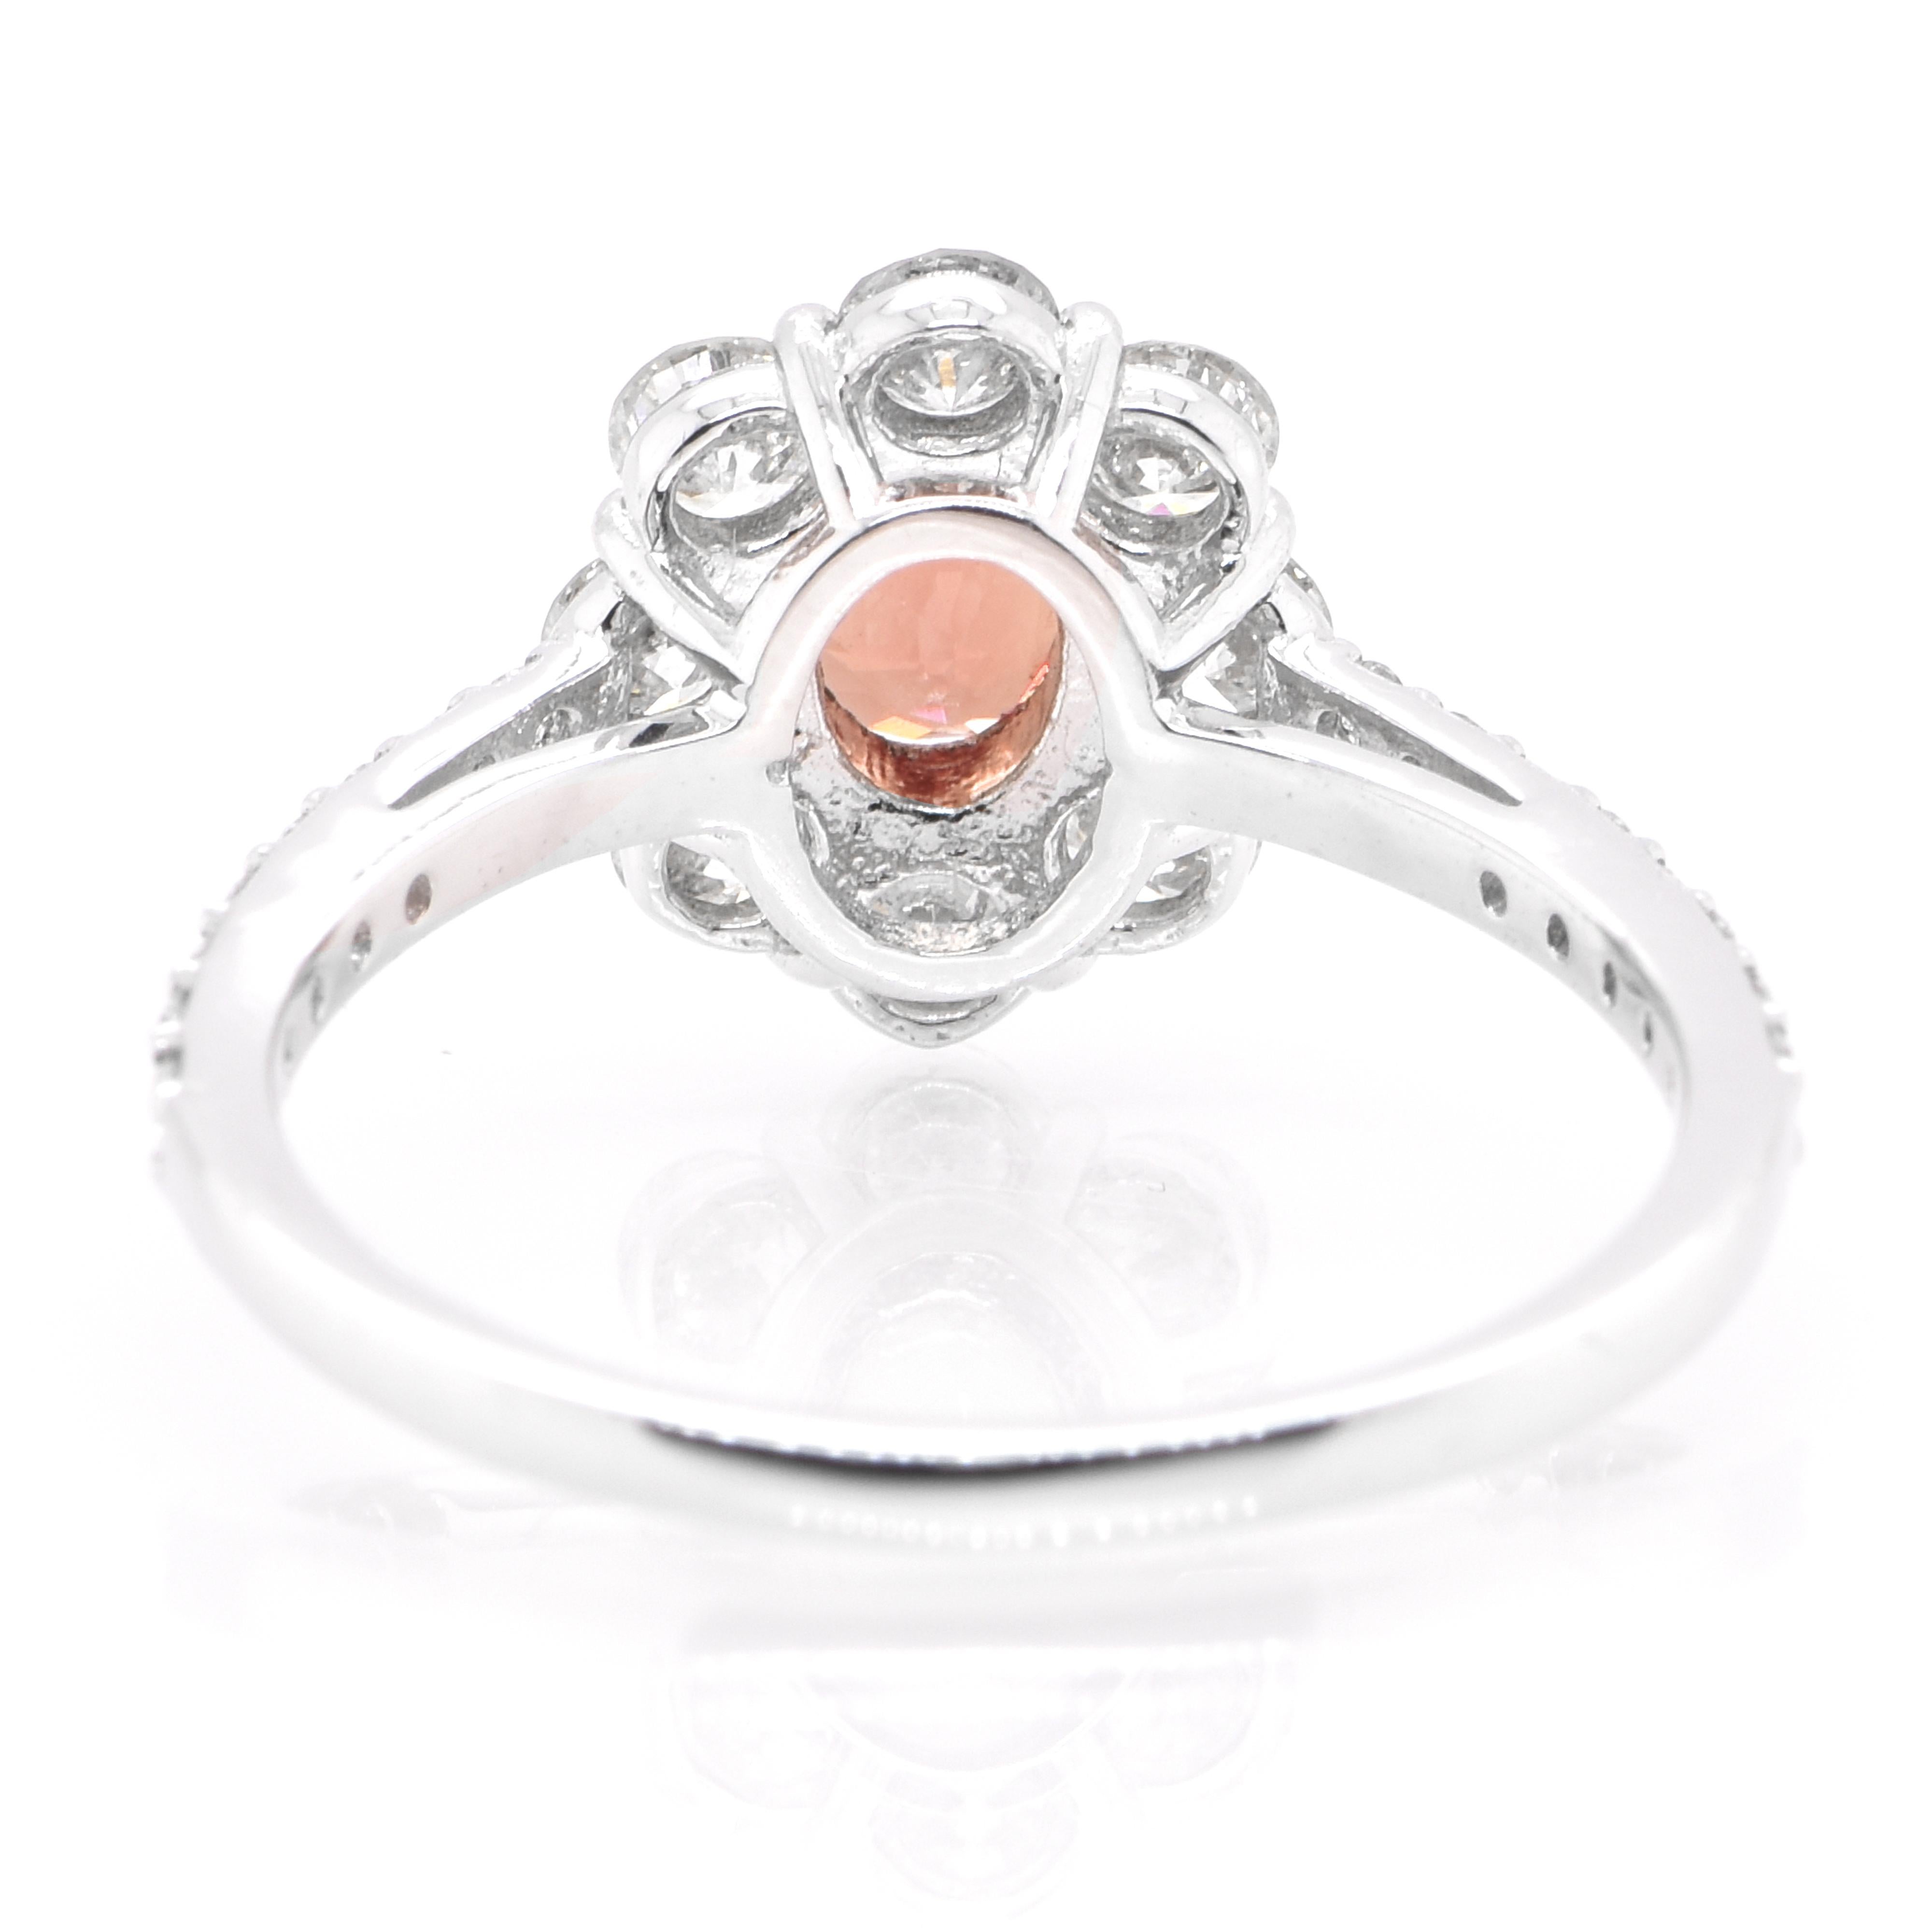 A beautiful ring featuring a 0.772 Carat, Natural Padparadscha Sapphire and 0.79 Carats of Diamond Accents set in Platinum. Sapphires have extraordinary durability - they excel in hardness as well as toughness and durability making them very popular